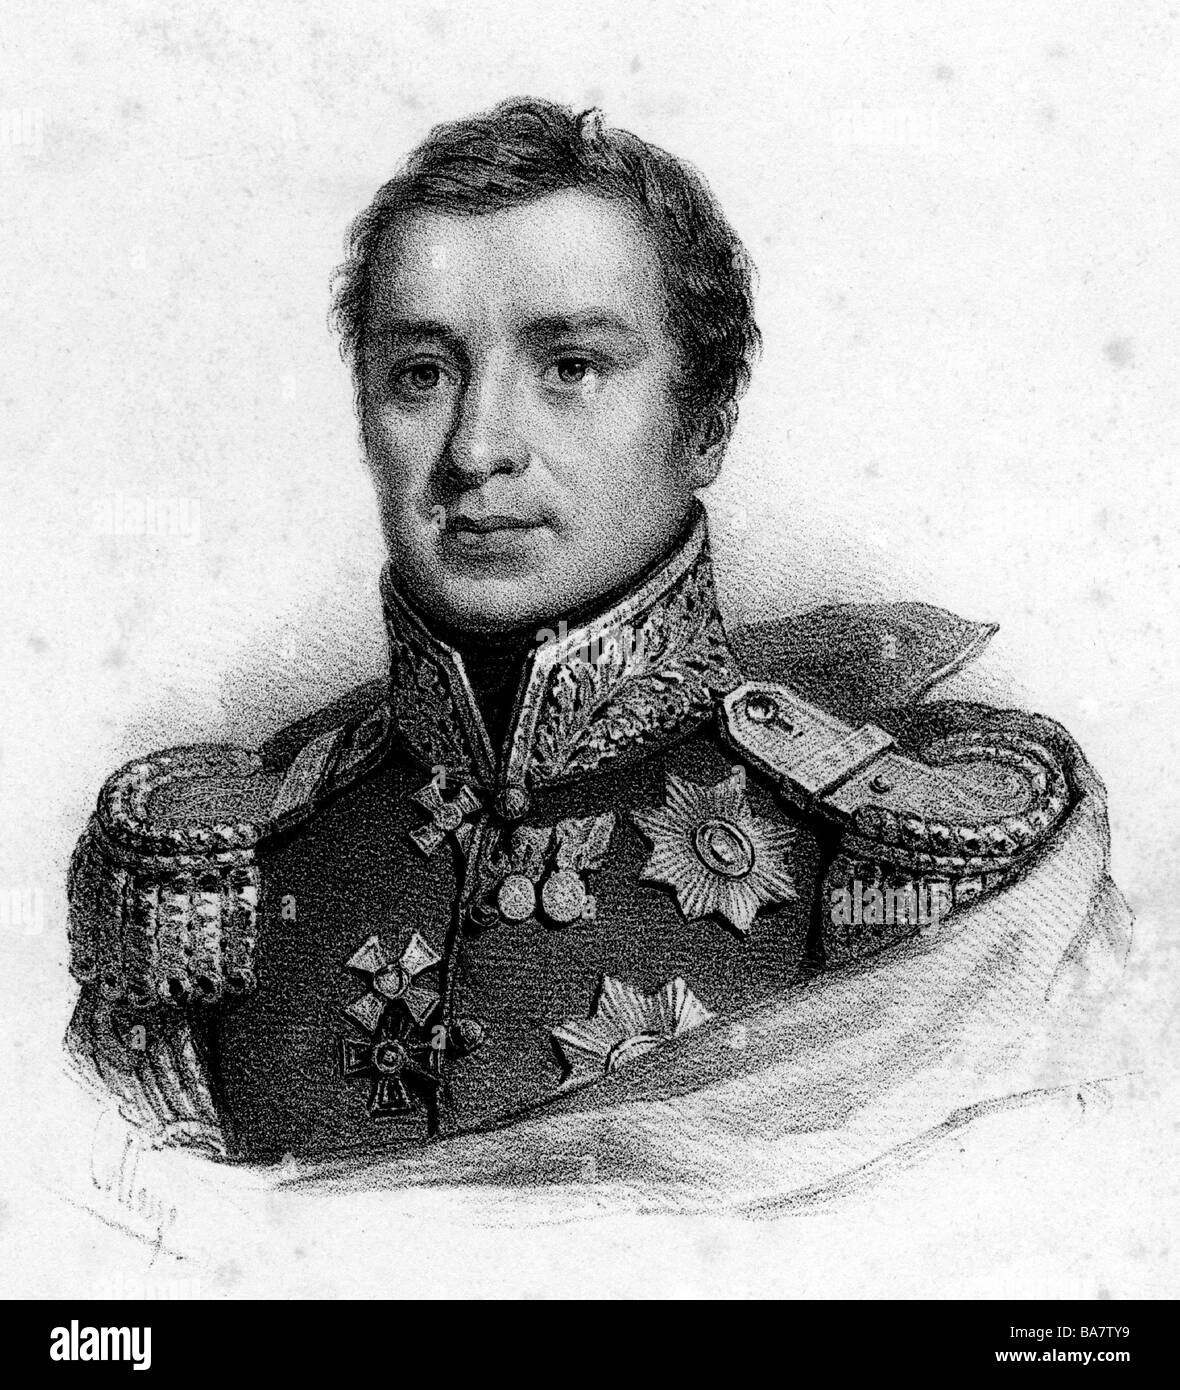 Paskevich, Ivan Fyodorovich, 19.5.1782 - 13.2.1856, Russian general,  portrait, lithograph by P. Degobert, 19th century, , Stock Photo